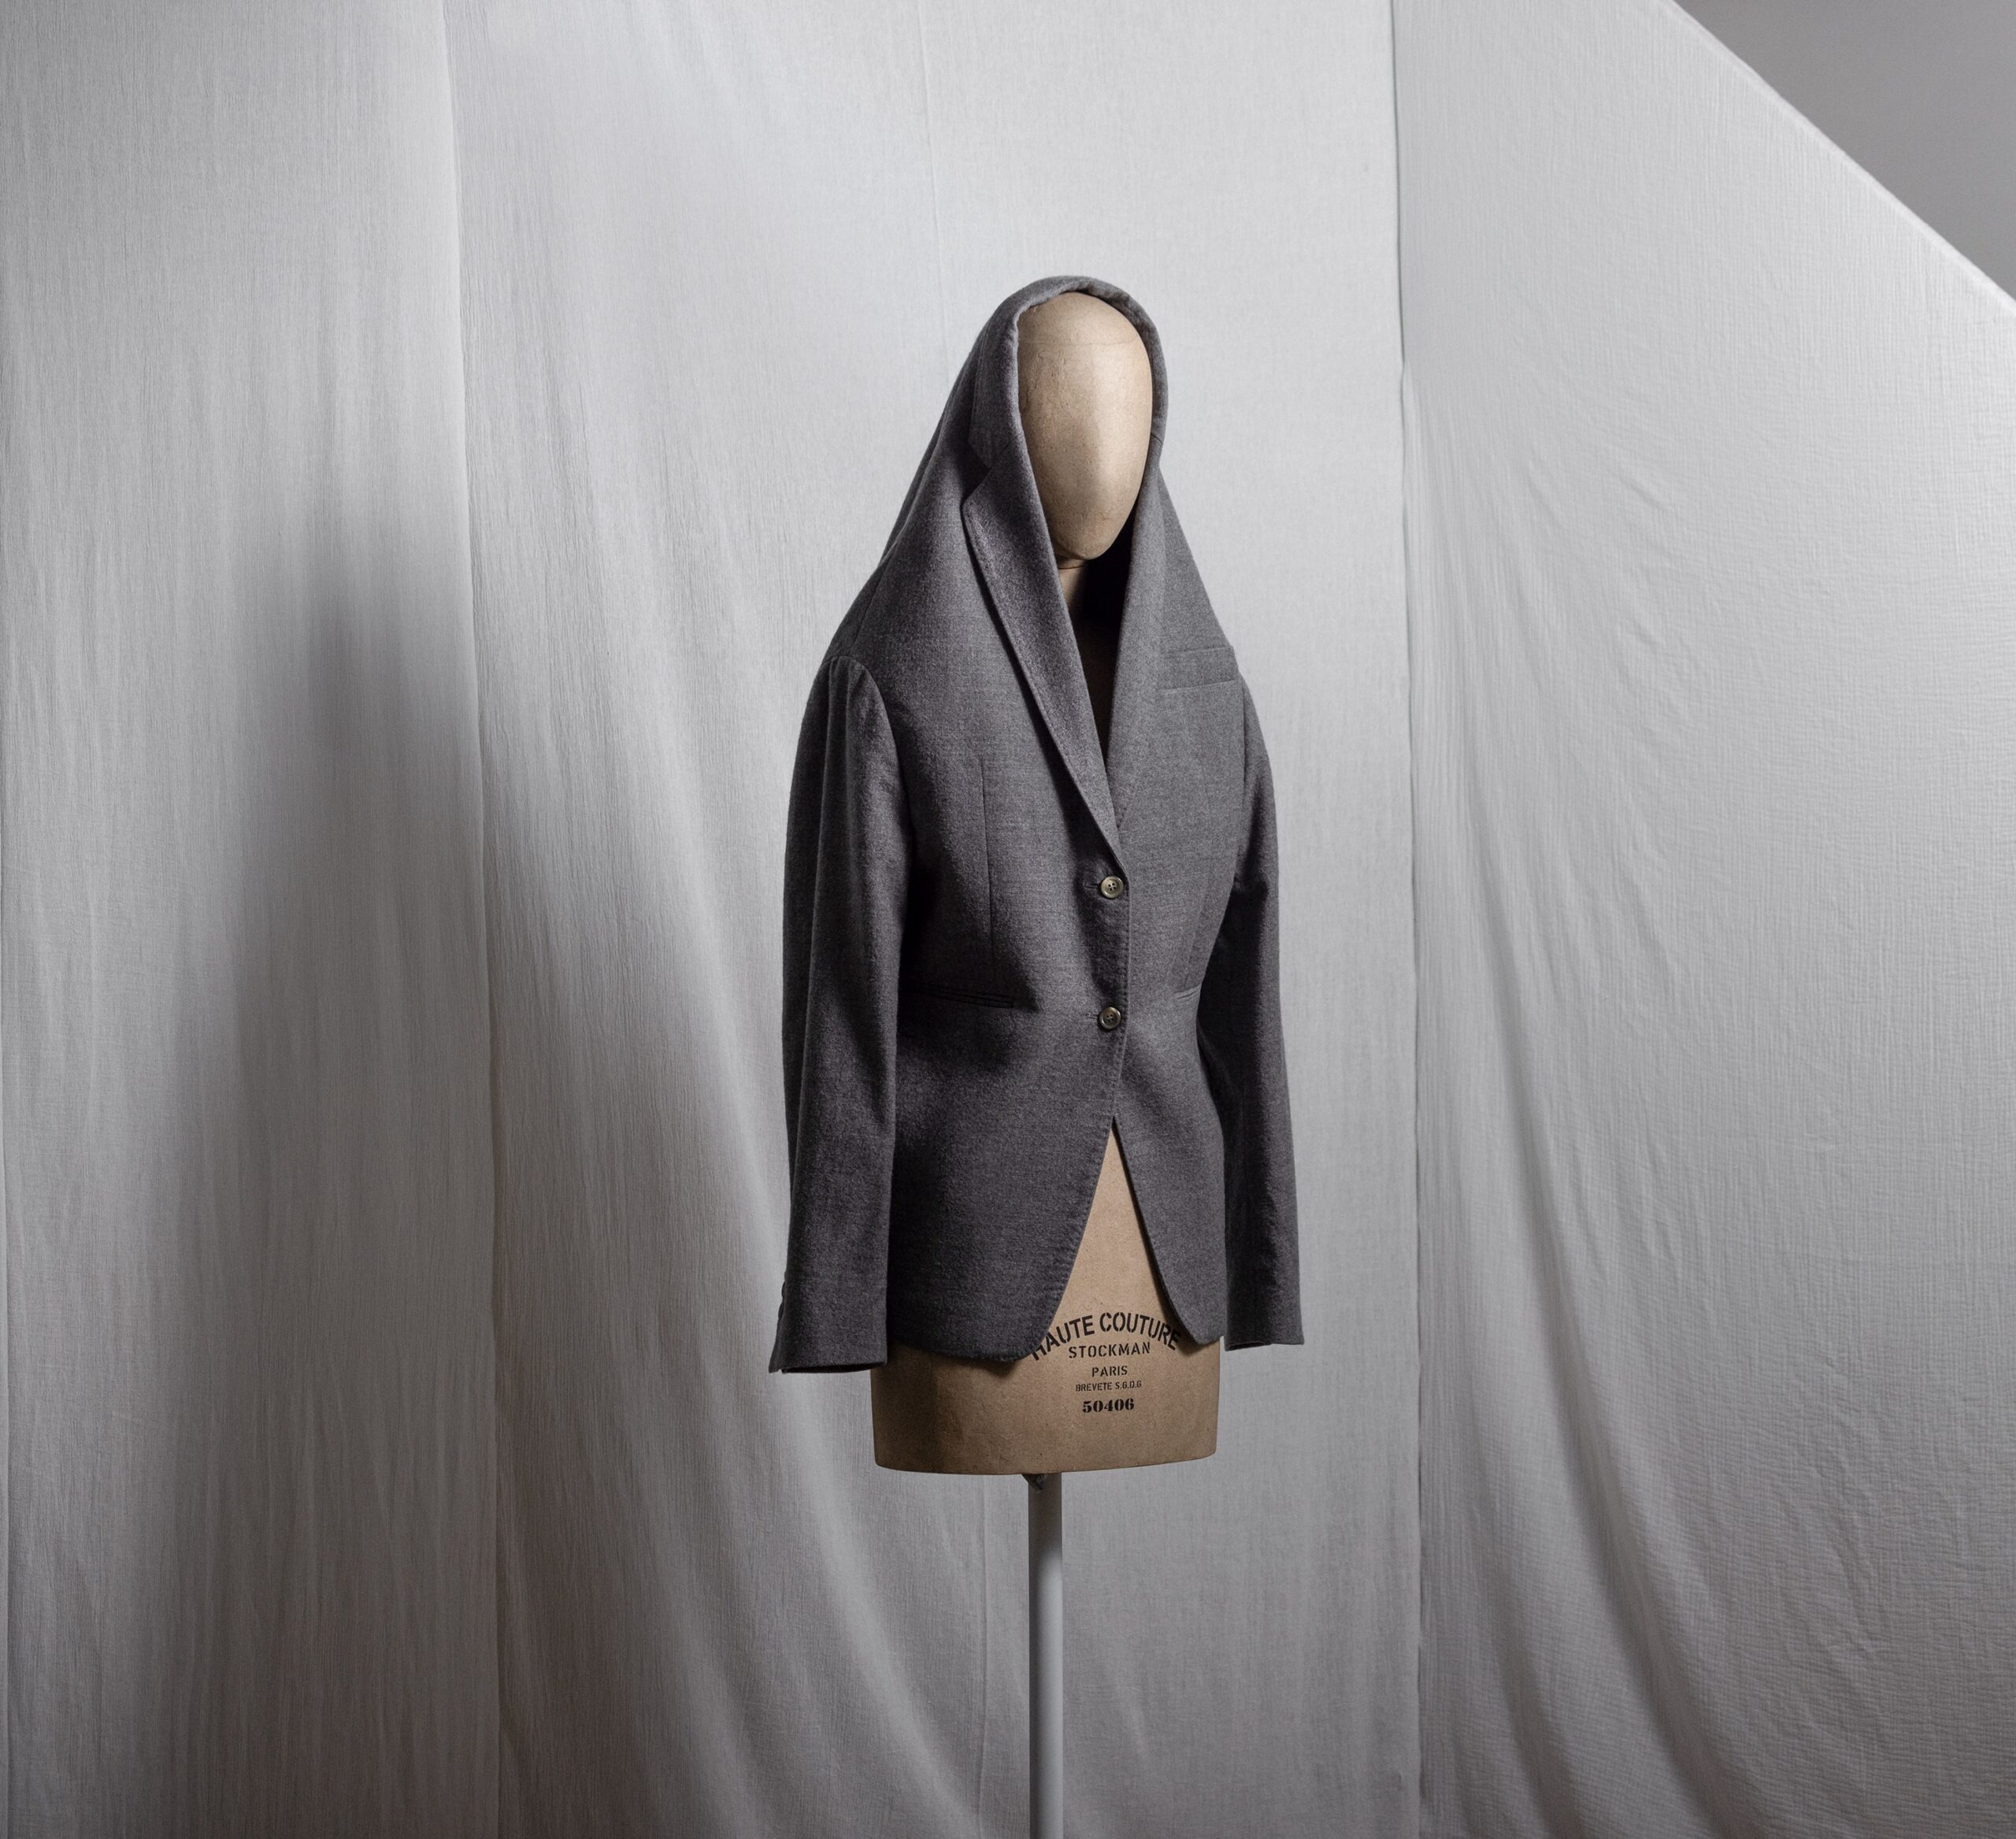 Parodi Costume Collection presents MARGIELA: IN THE VOID , an ...